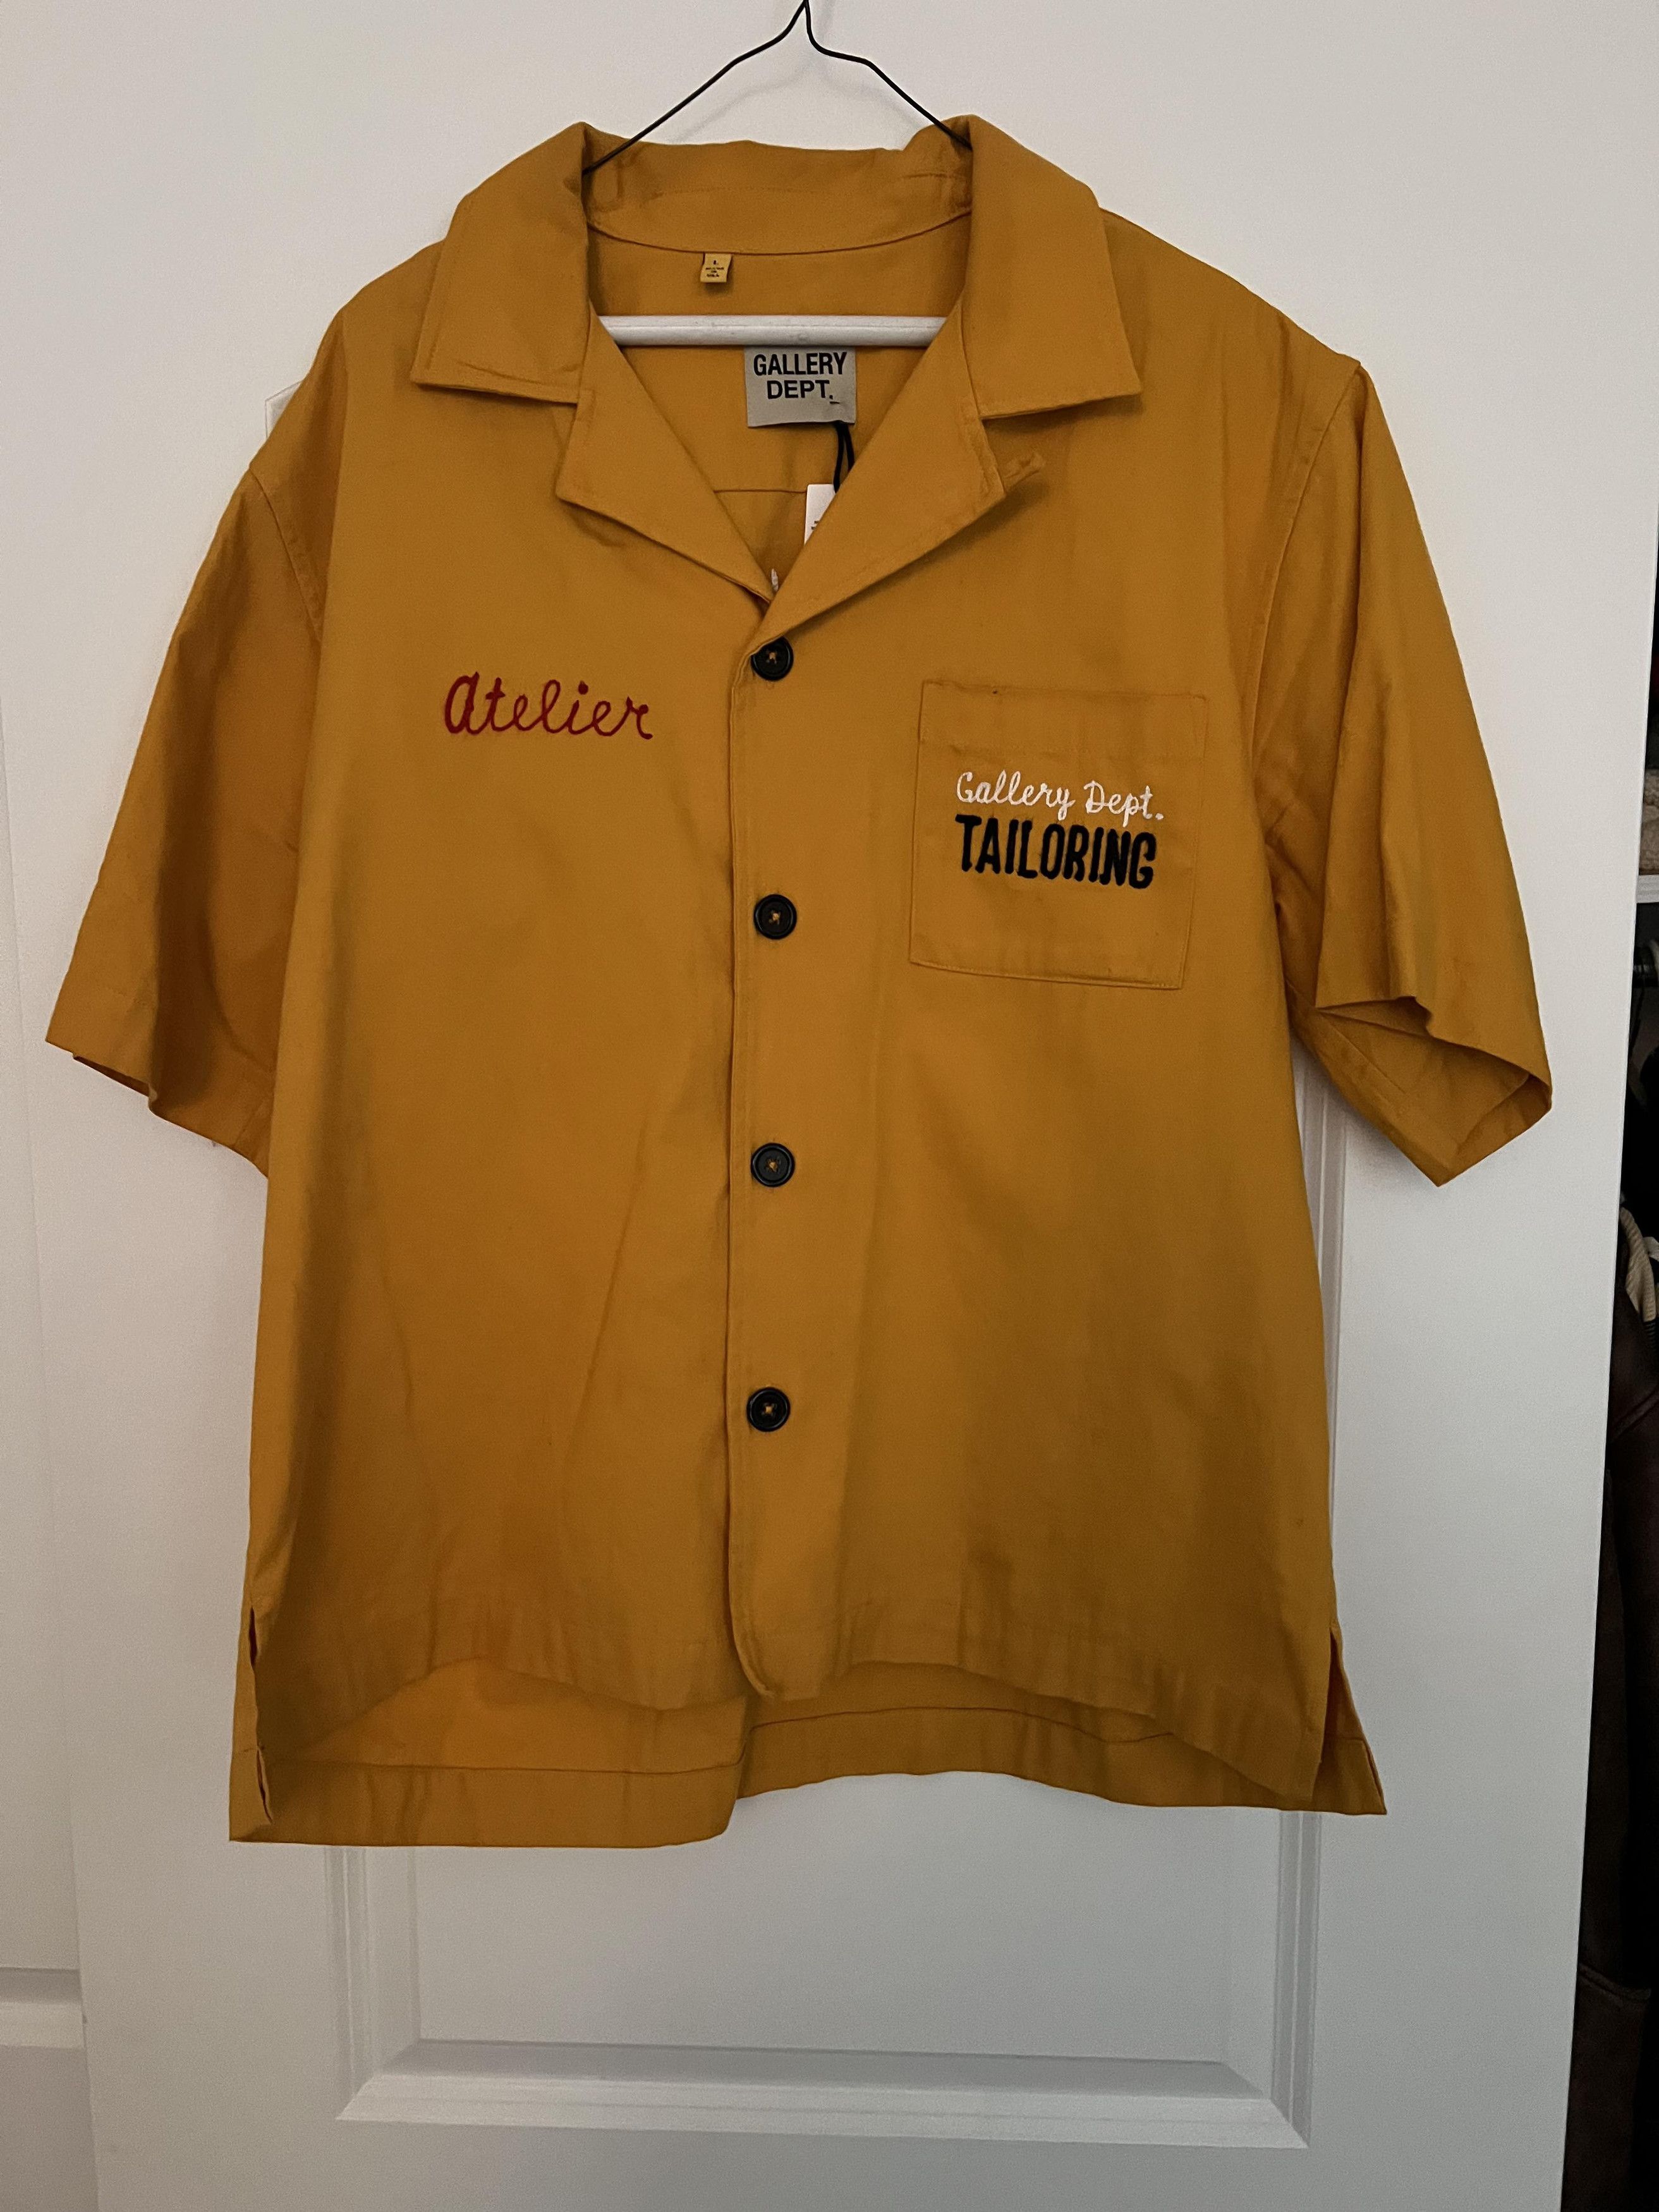 Gallery Dept. Gallery Dept Yellow Atelier Parker Shirt Large | Grailed